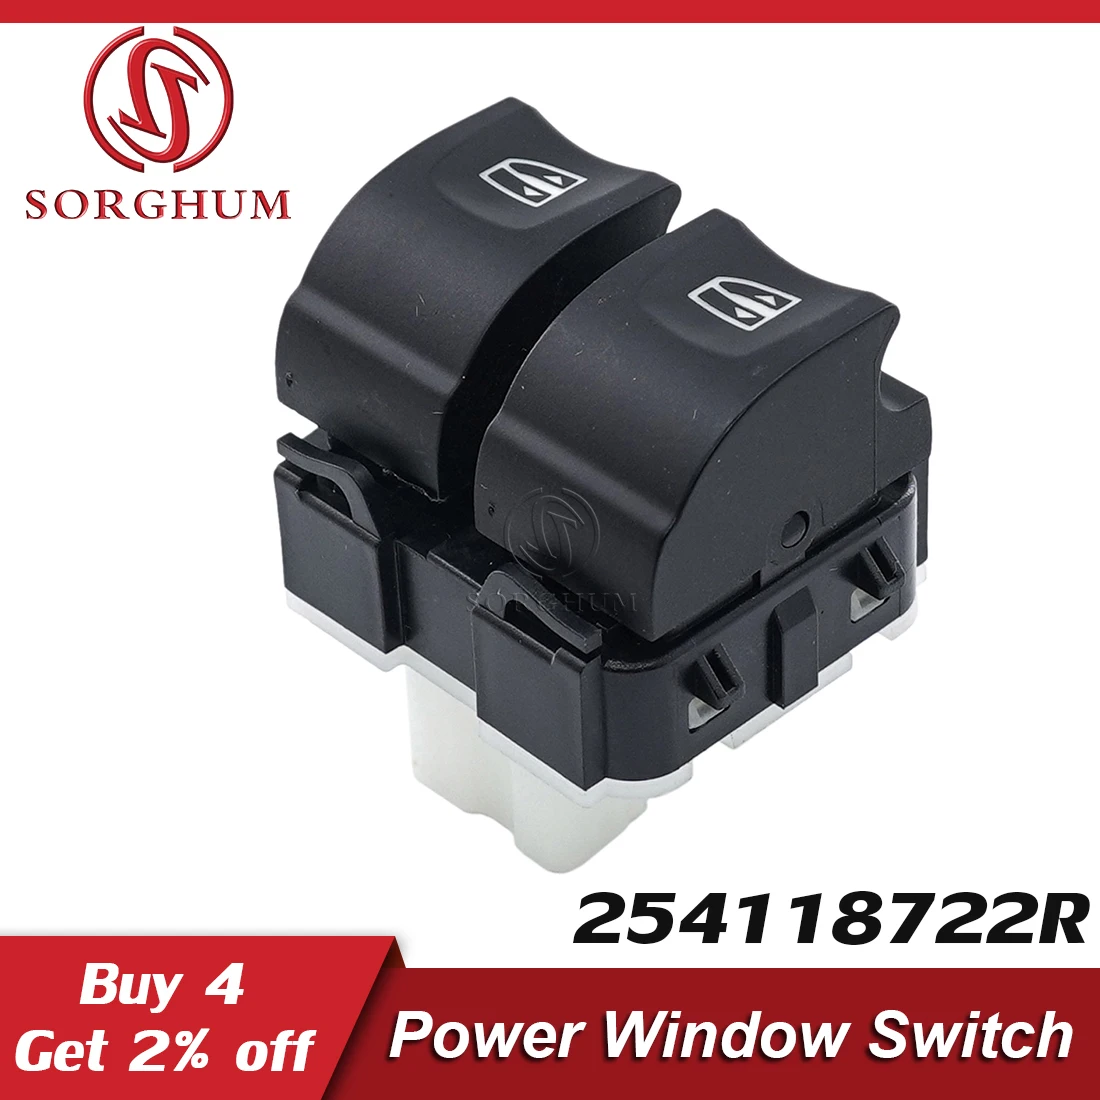 

Sorghum 254118722R 25411-8722R Electric Power Window Switch Lifter Button For Renault Captur Clio Symbol Thalia ZOE 2012-2021